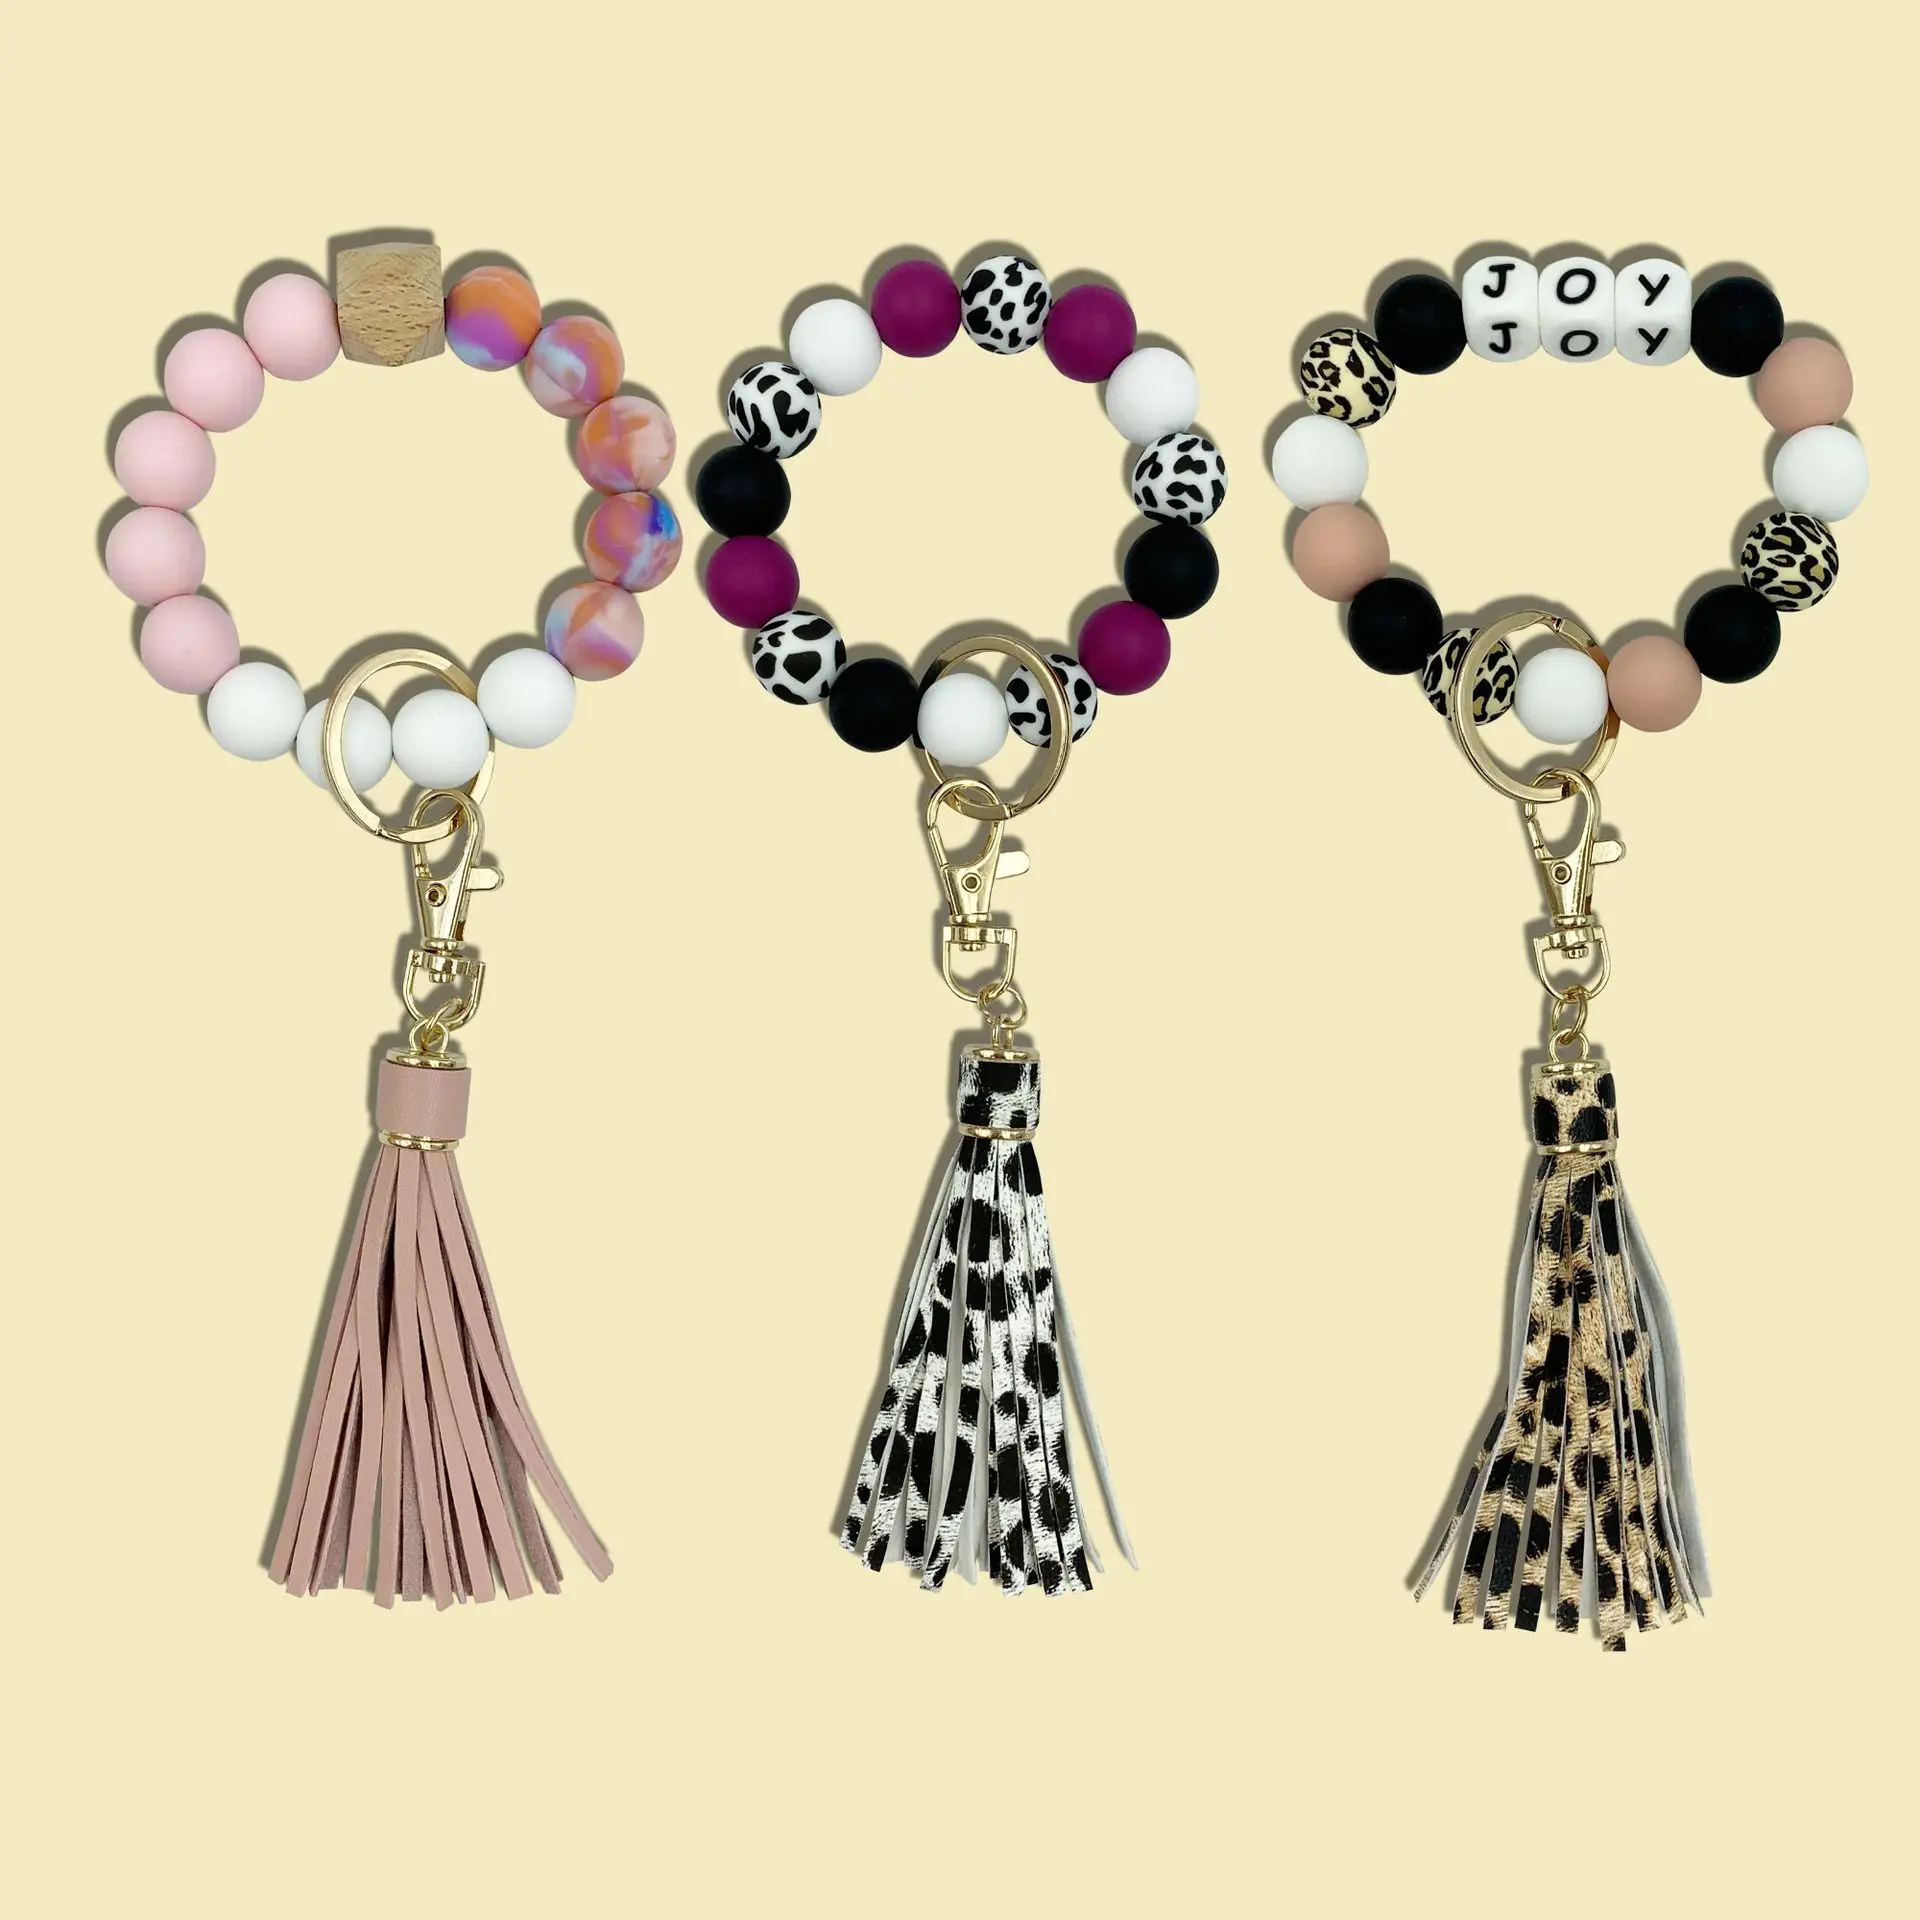 

Elastic rope wrist bracelet Silicone beads leather tassel key chain can be added wood chips, Photo shows